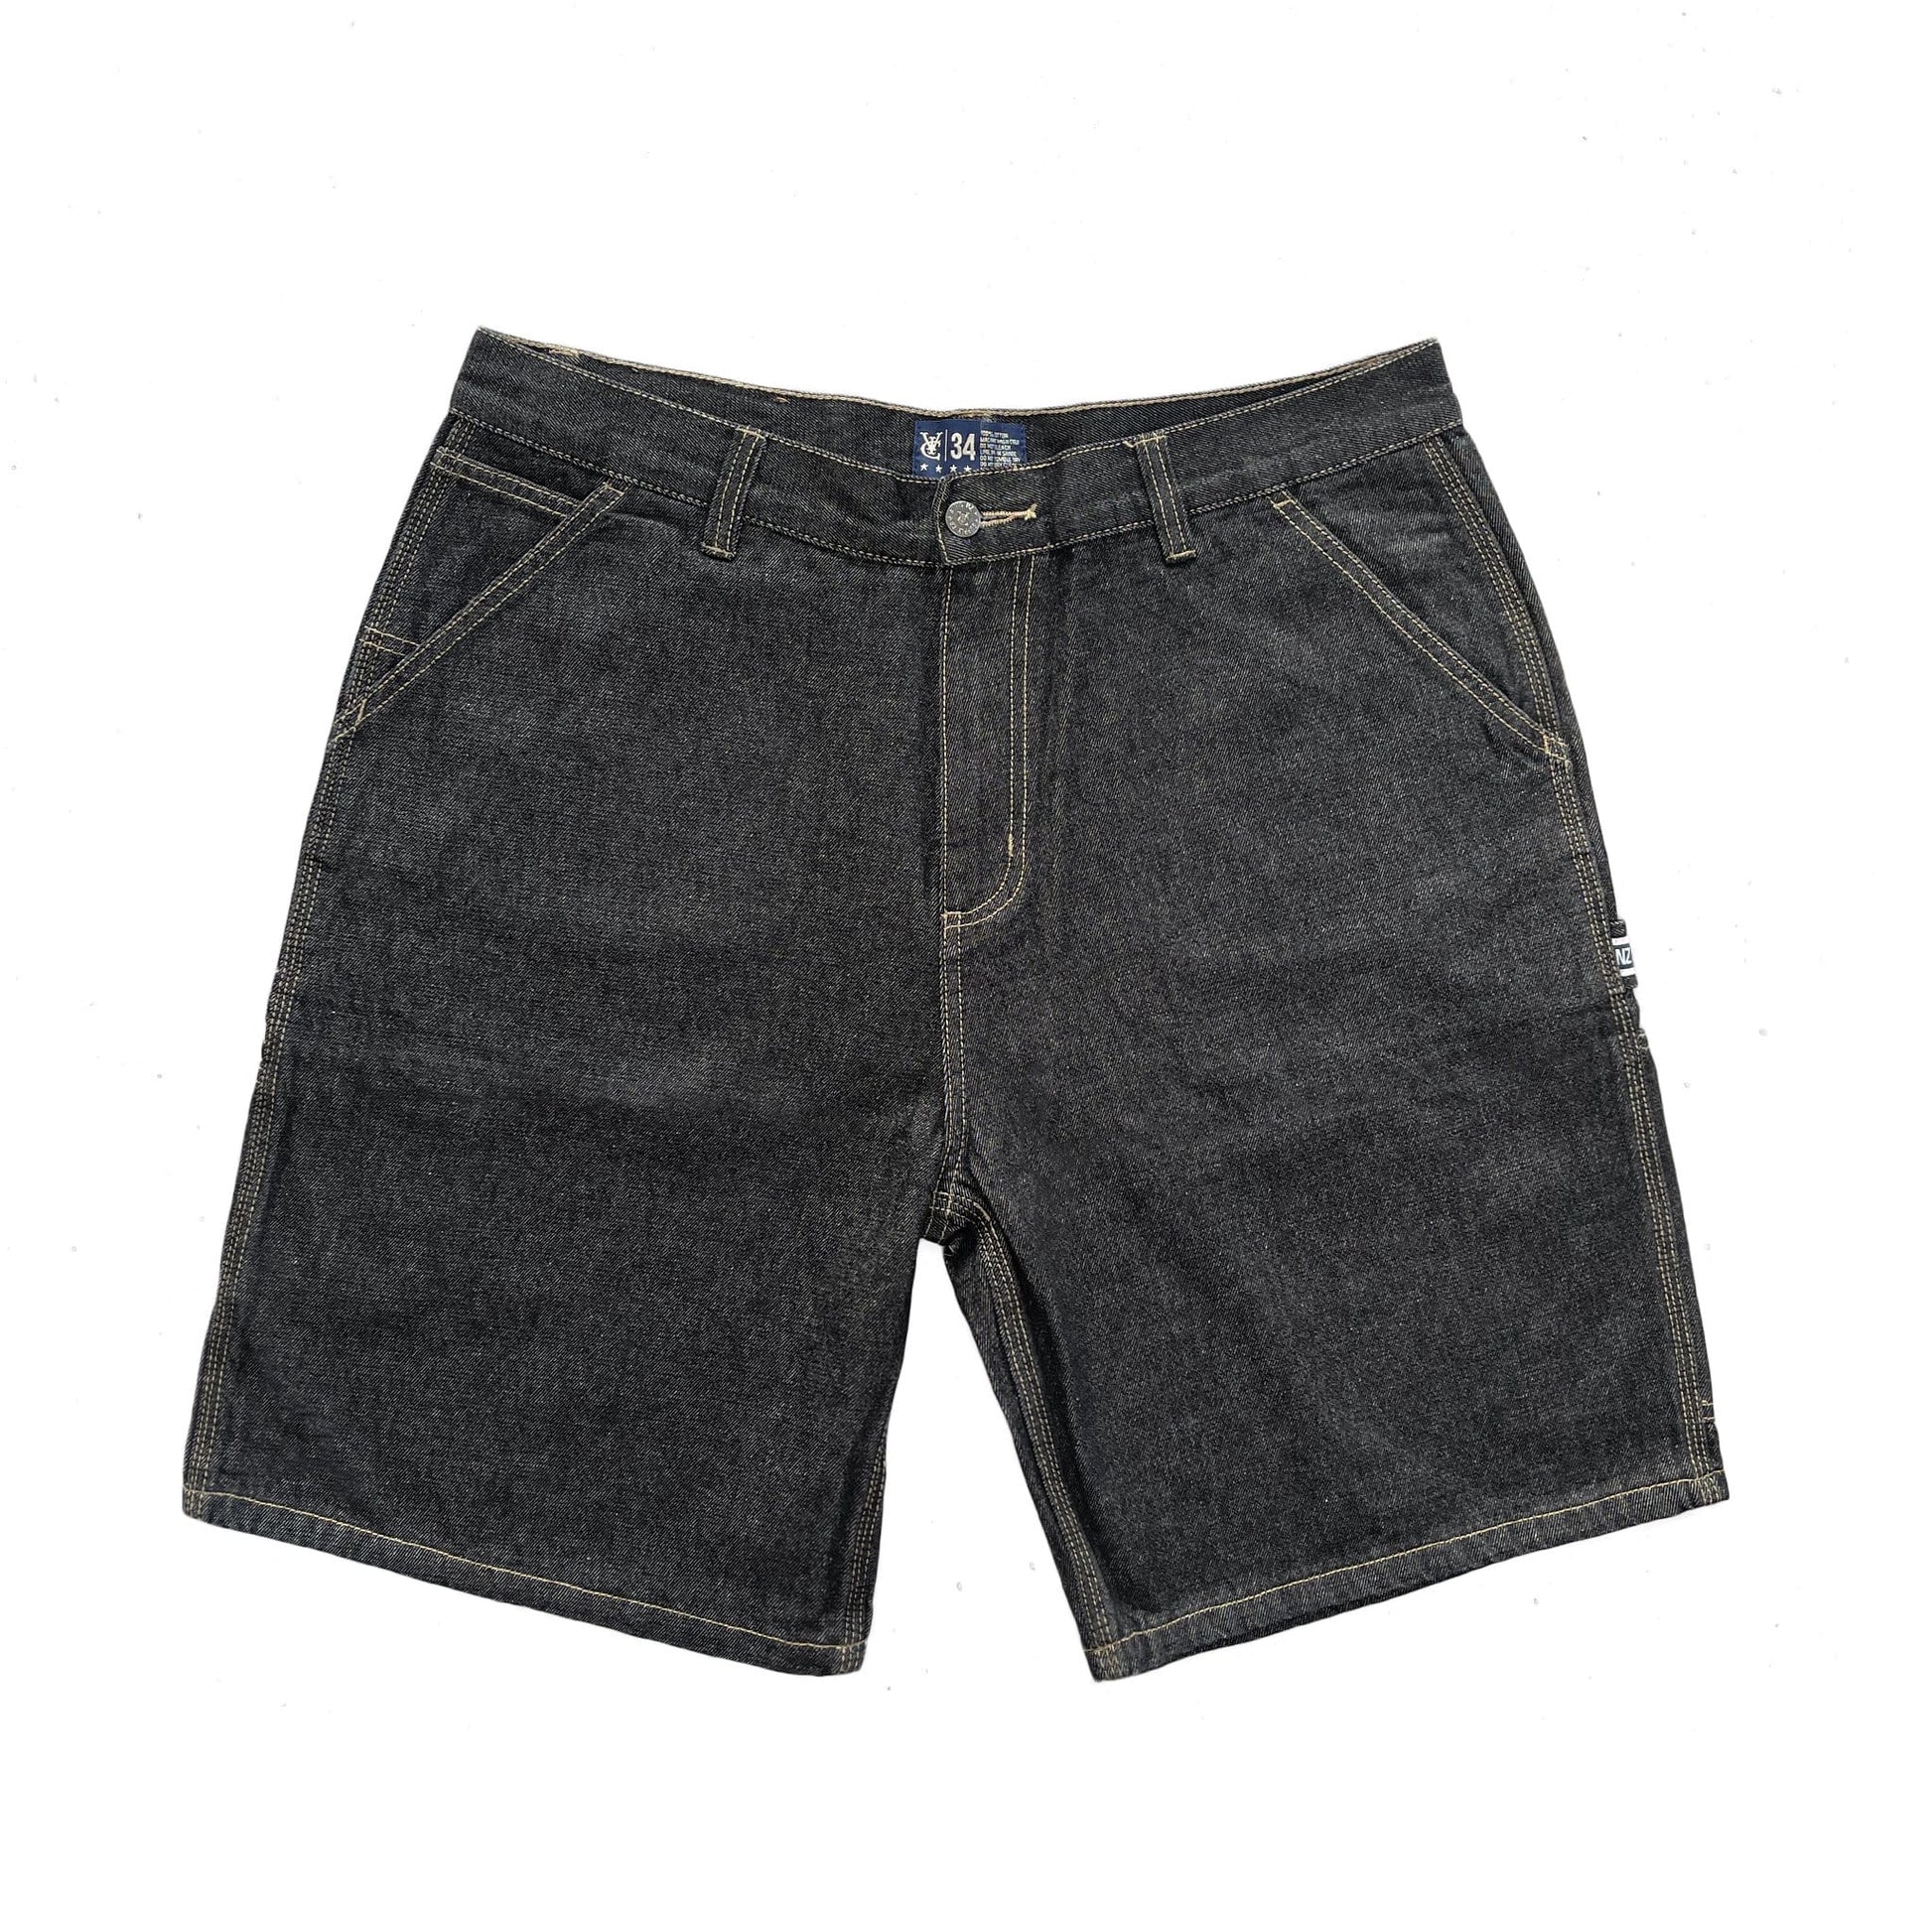 Premium quality carpenter denim jean shorts by New Zealand skate and streetwear clothing label VIC Apparel. Loose fit. Featuring utility pockets and triple needle contrast stitching with VIC label flag at the back right pocket. Classic vintage workwear style. 90s baggy jorts style